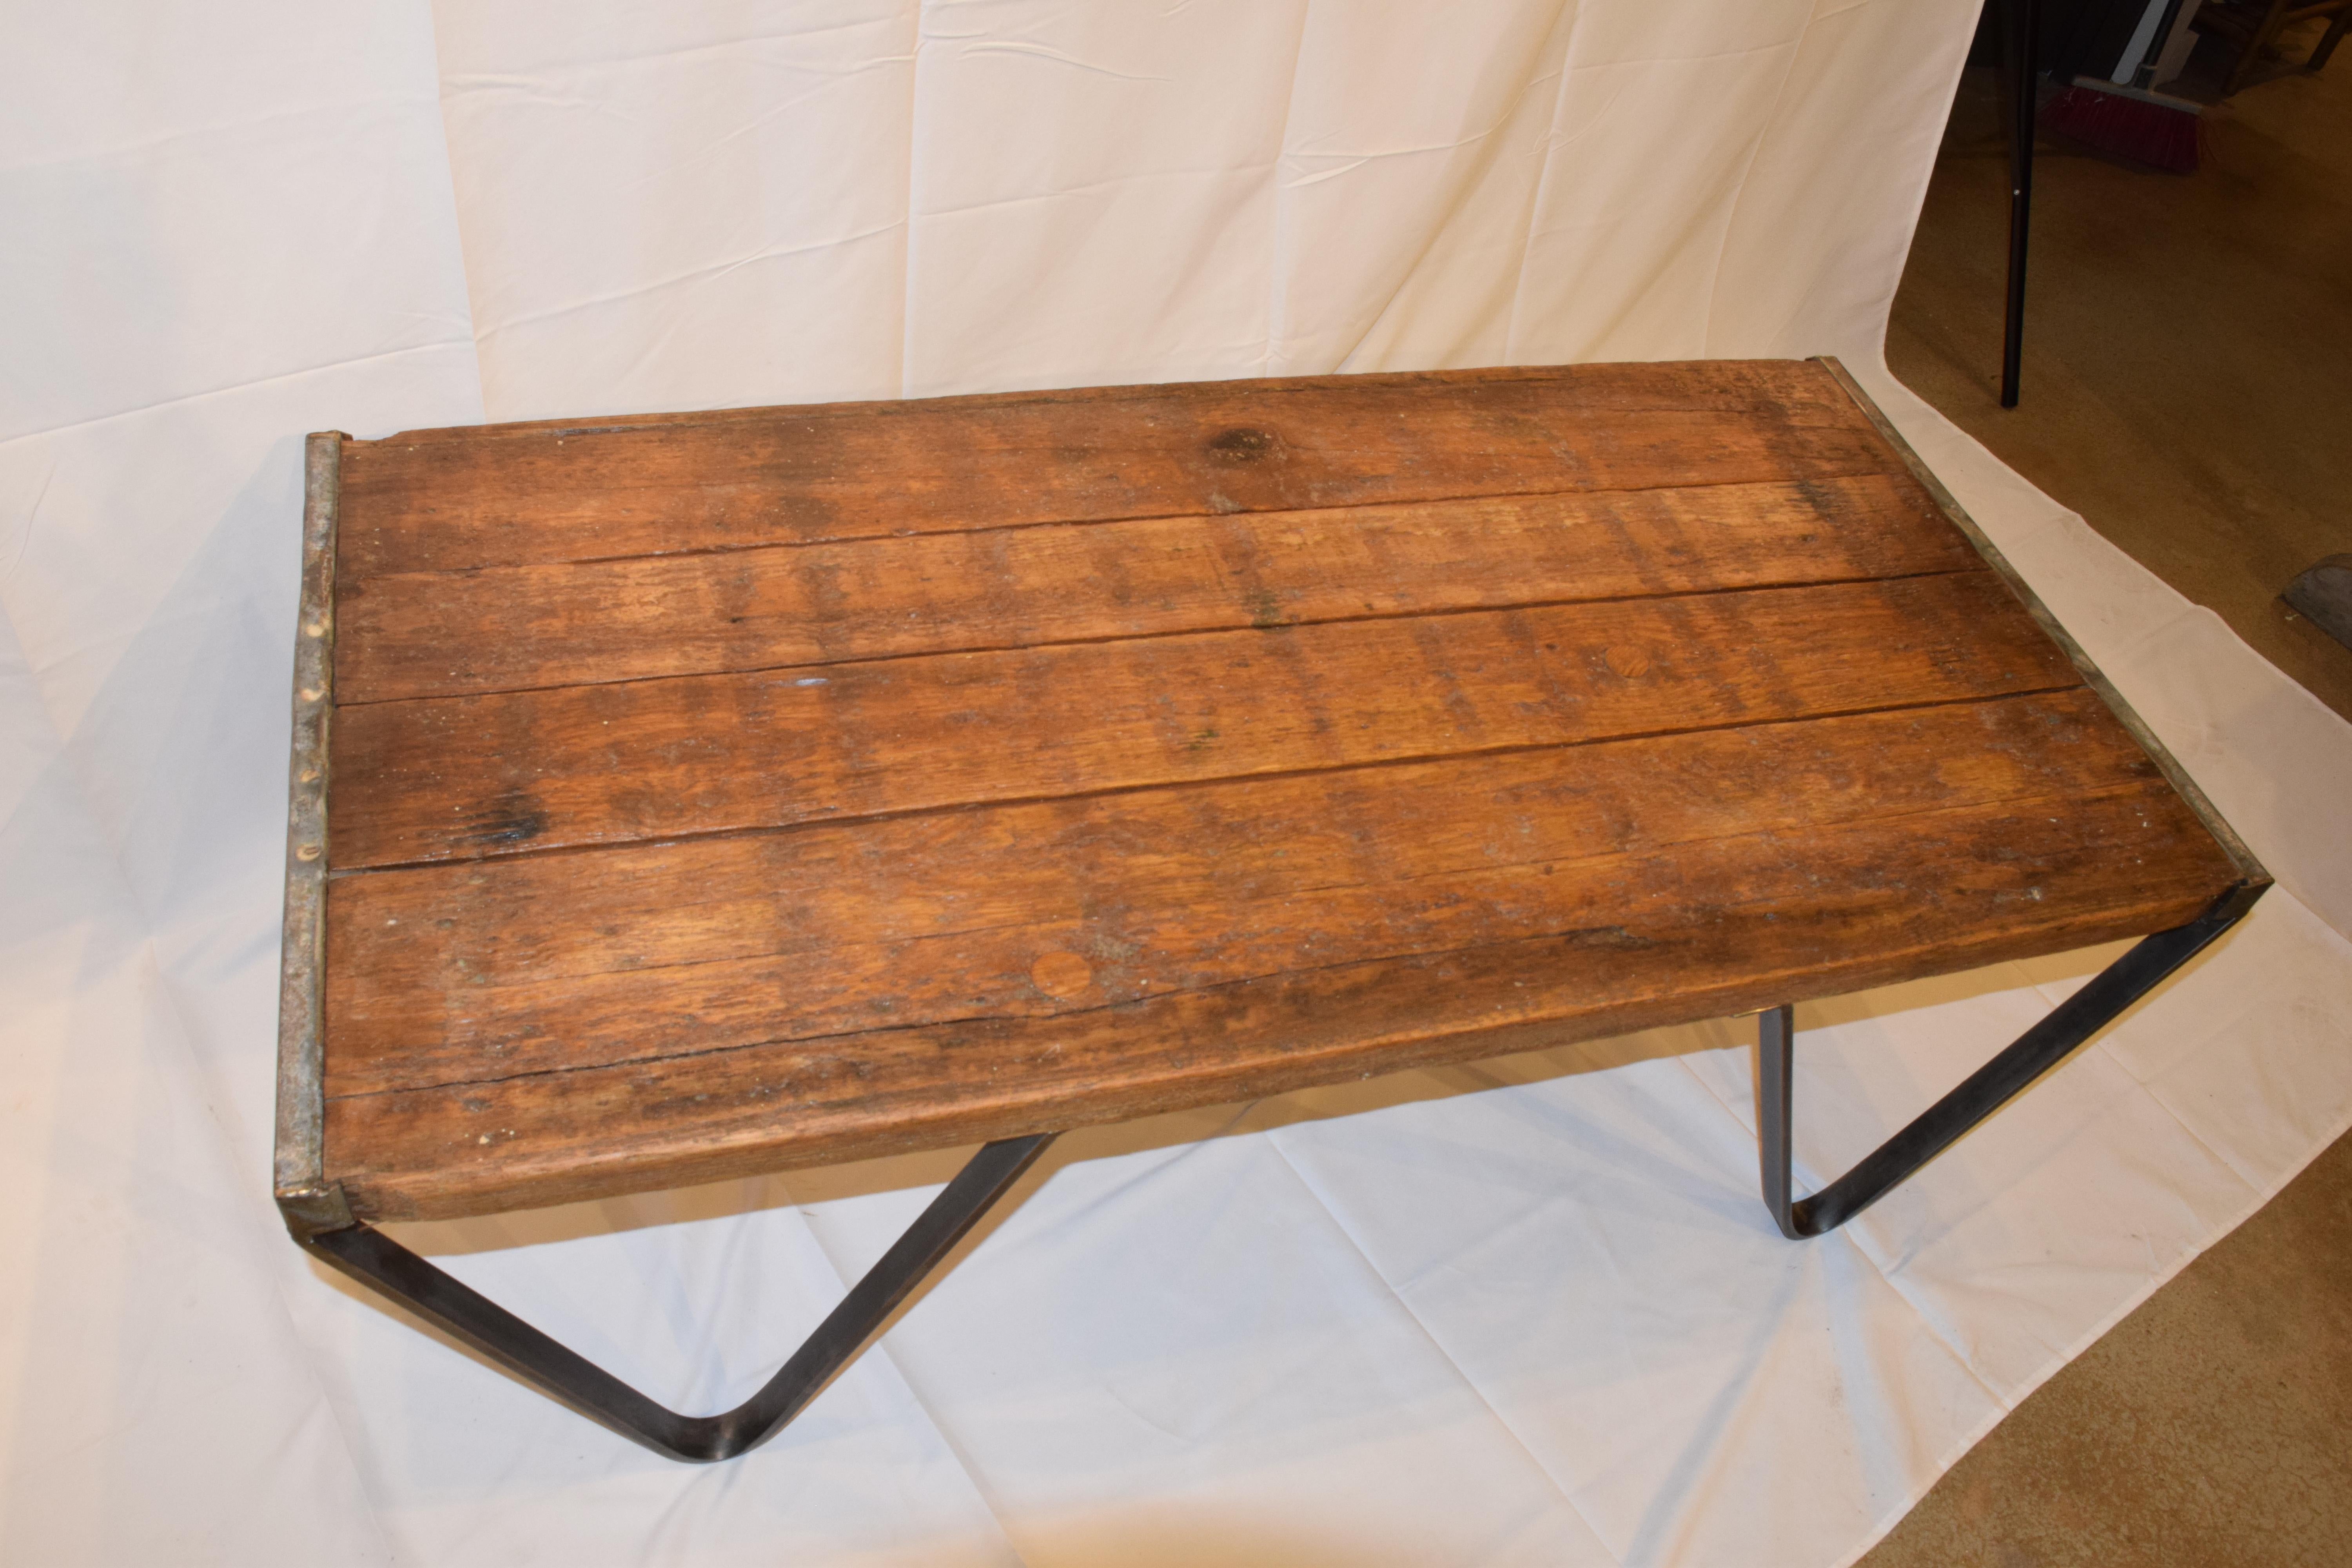 This is a coffee table newly made from an antique French brick layers pallet with a custom iron base. The wood pallet has a lovely aged and waxed patina and original metal ends. A wonderful coffee table which can be used in a traditional or modern